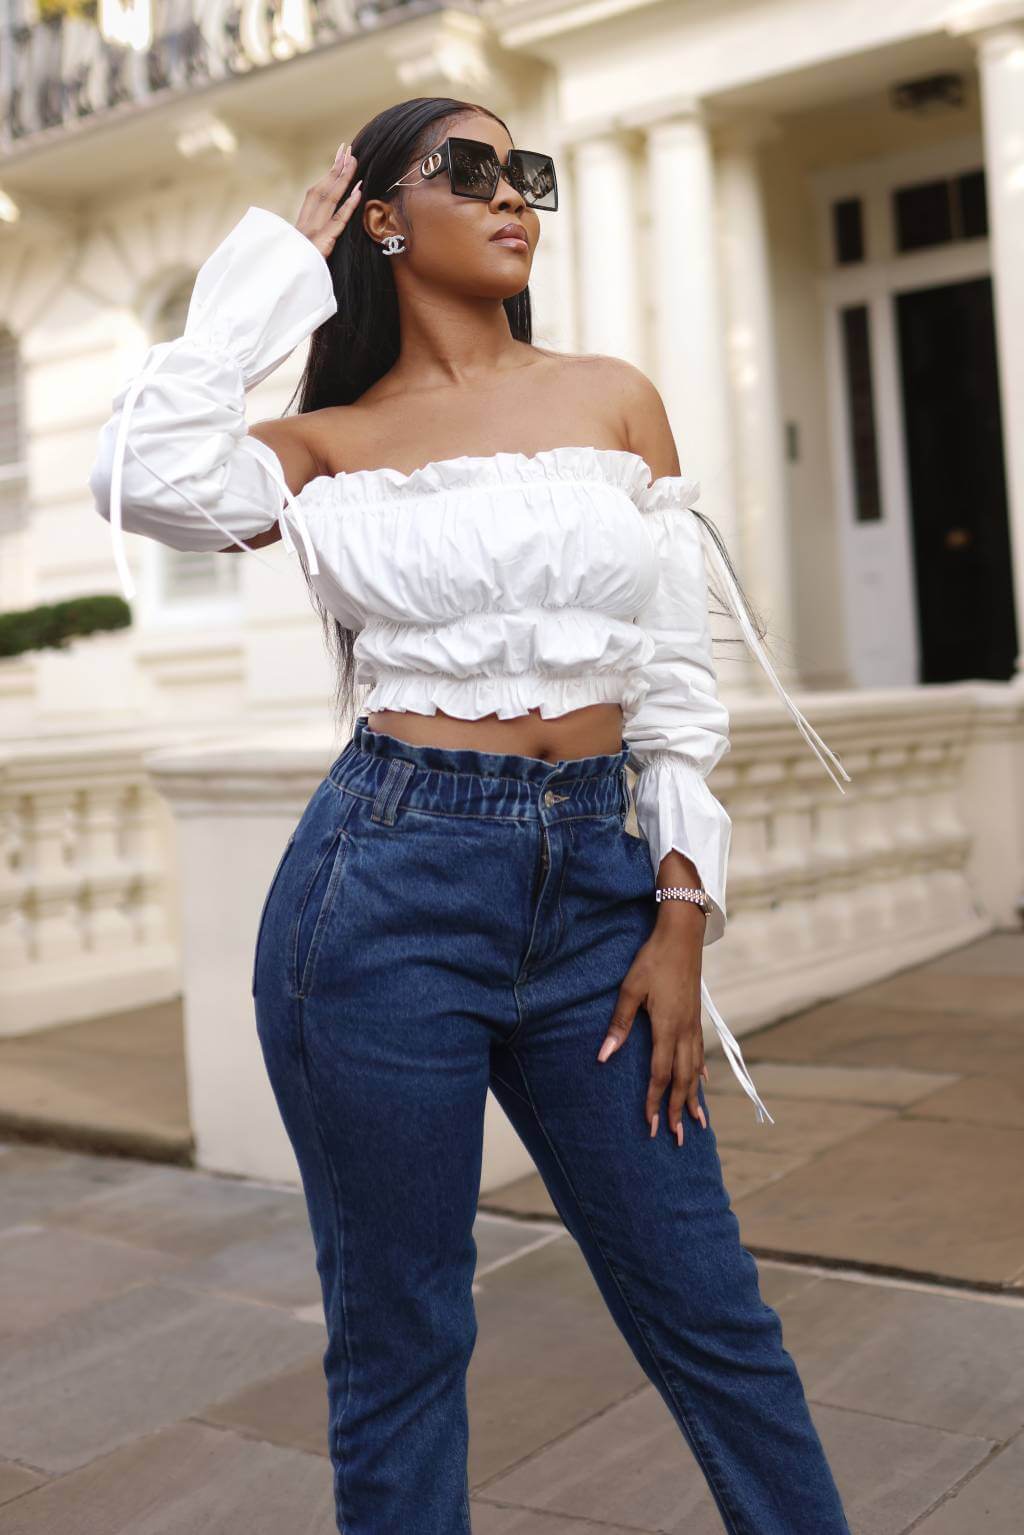 Ever wish you were a rock star or music icon? Look more snatched than ever in SETSOFRAN London Ruffle Crop Top. It's gathered bust perfectly contours your curves. Featuring off-shoulder, ruffle hem and long elastic puffy sleeves. This top is everything you need.